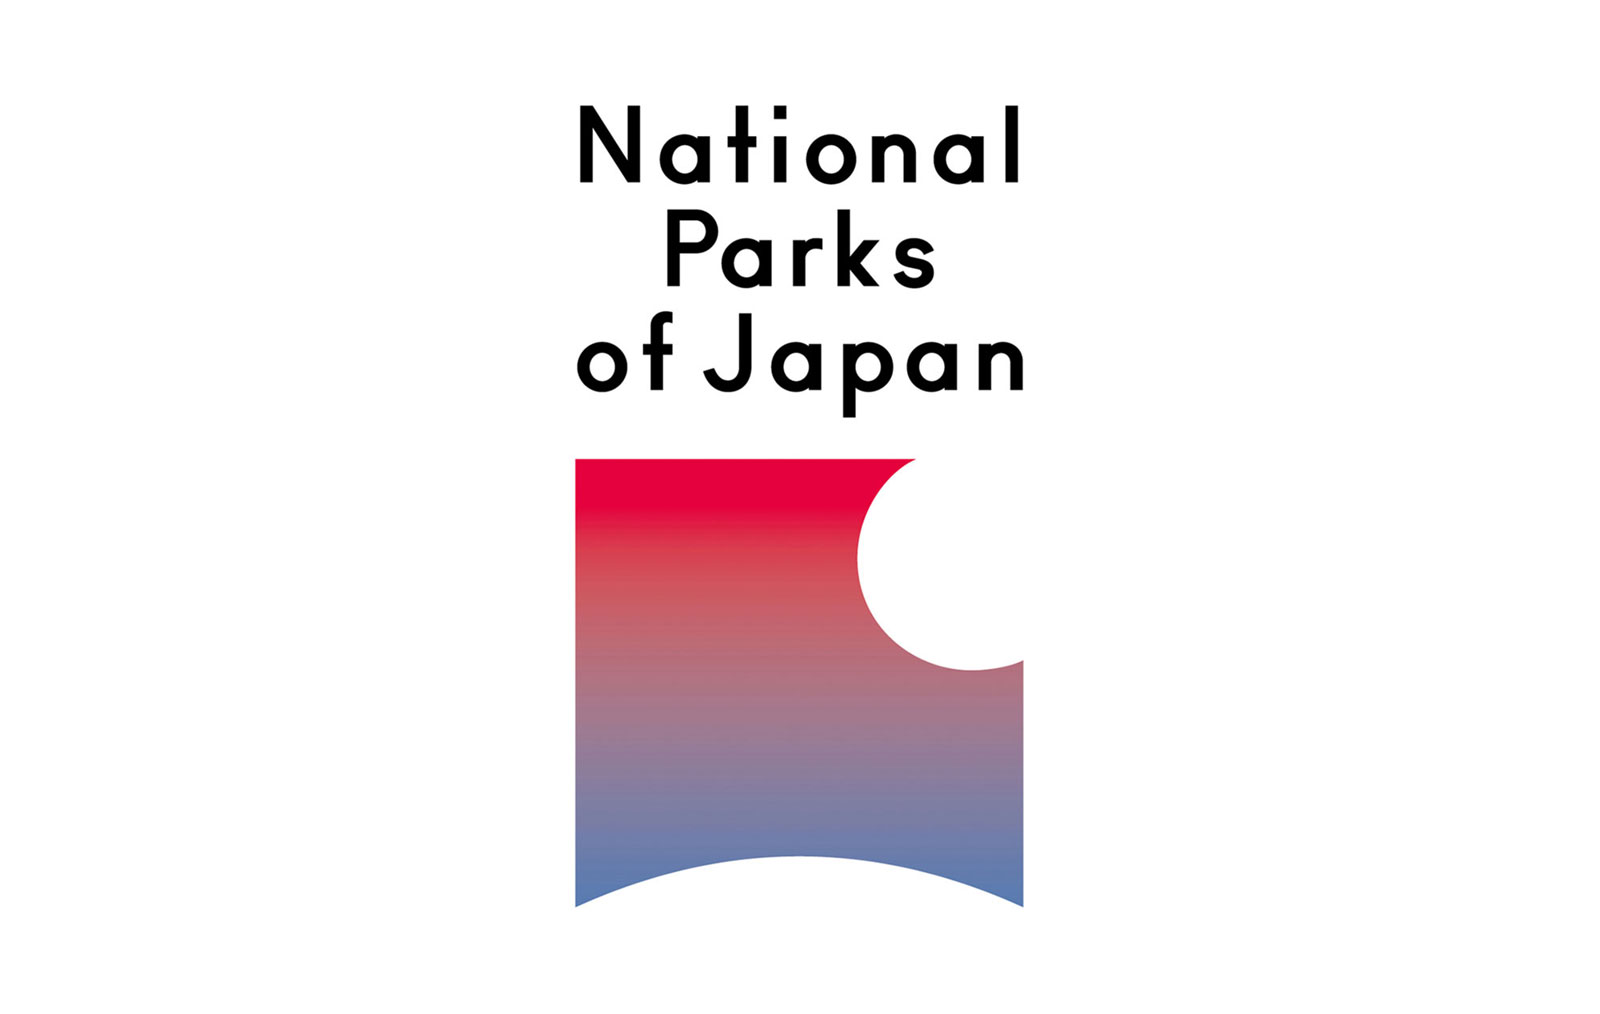 National Parks of Japan 国立公园